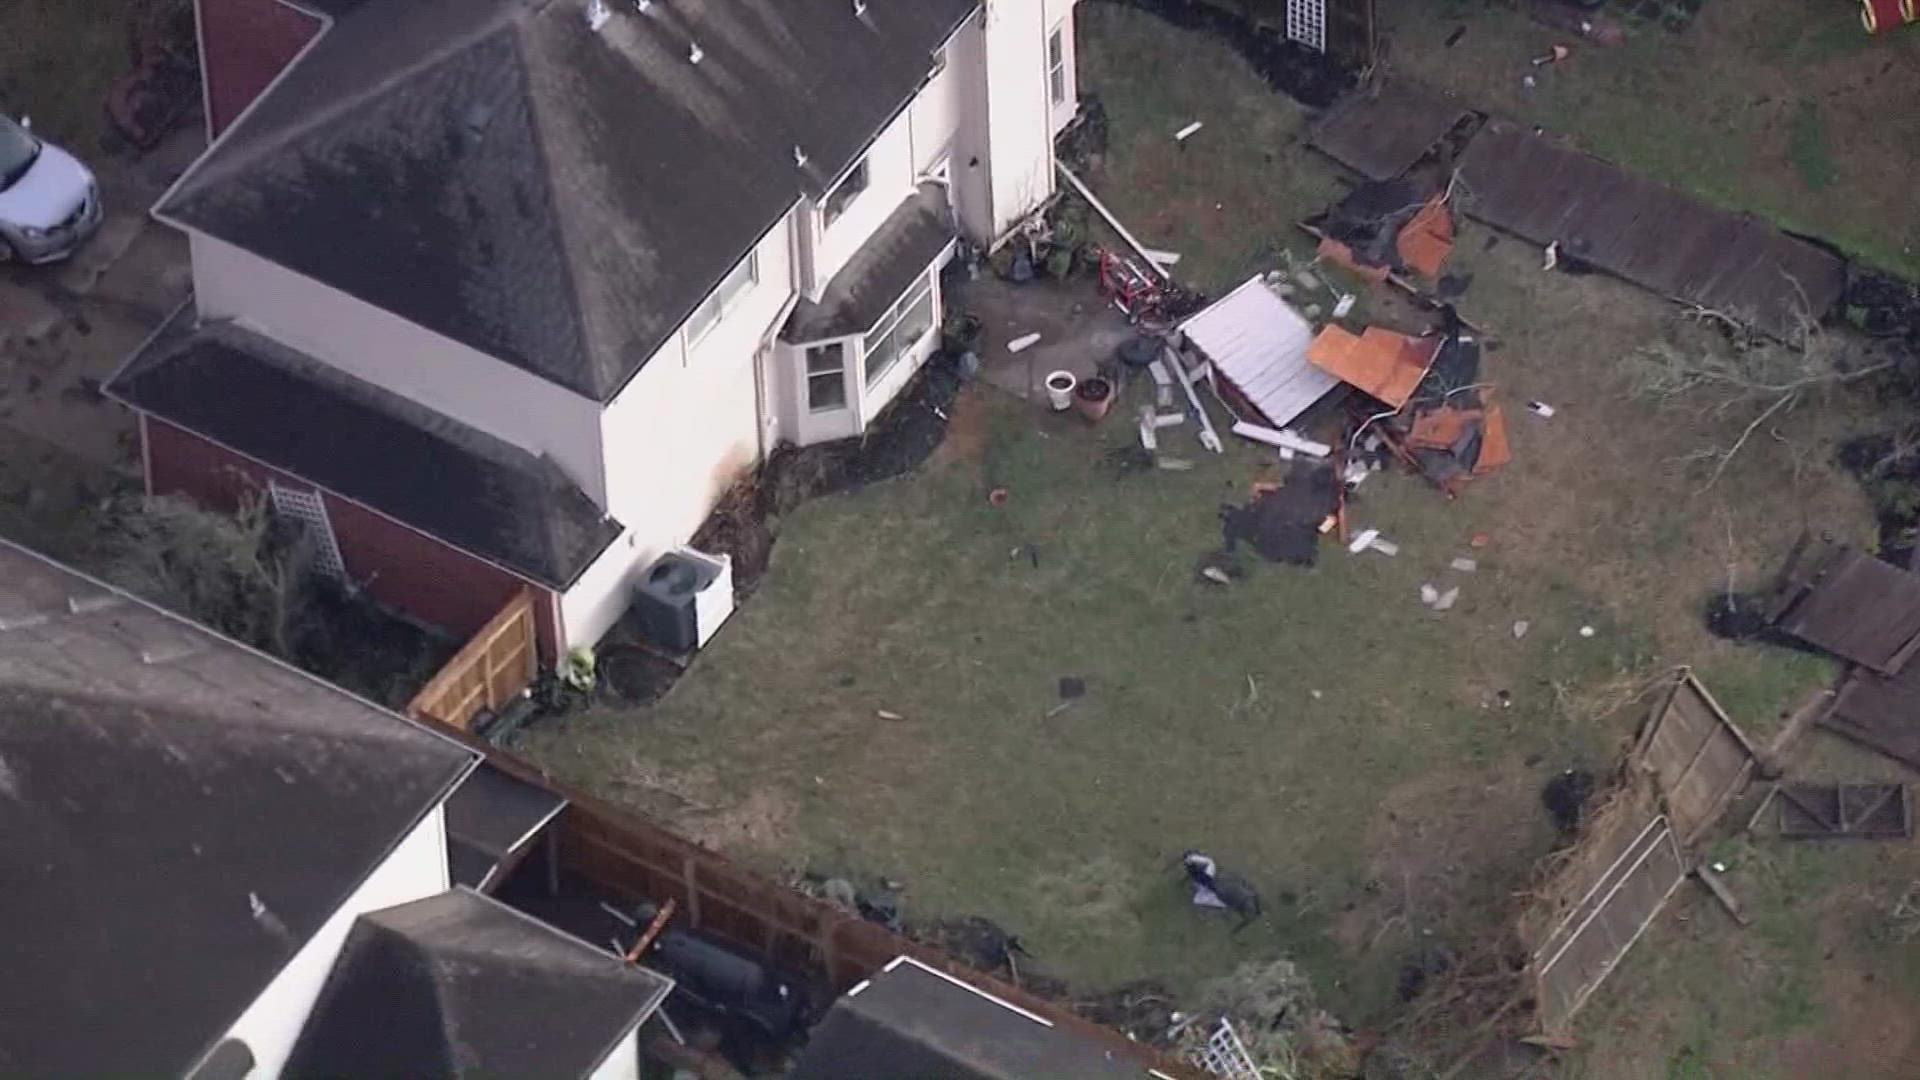 KHOU had a chopper in the air to capture othe aftermath of storms that hit the area earlier Tuesday.